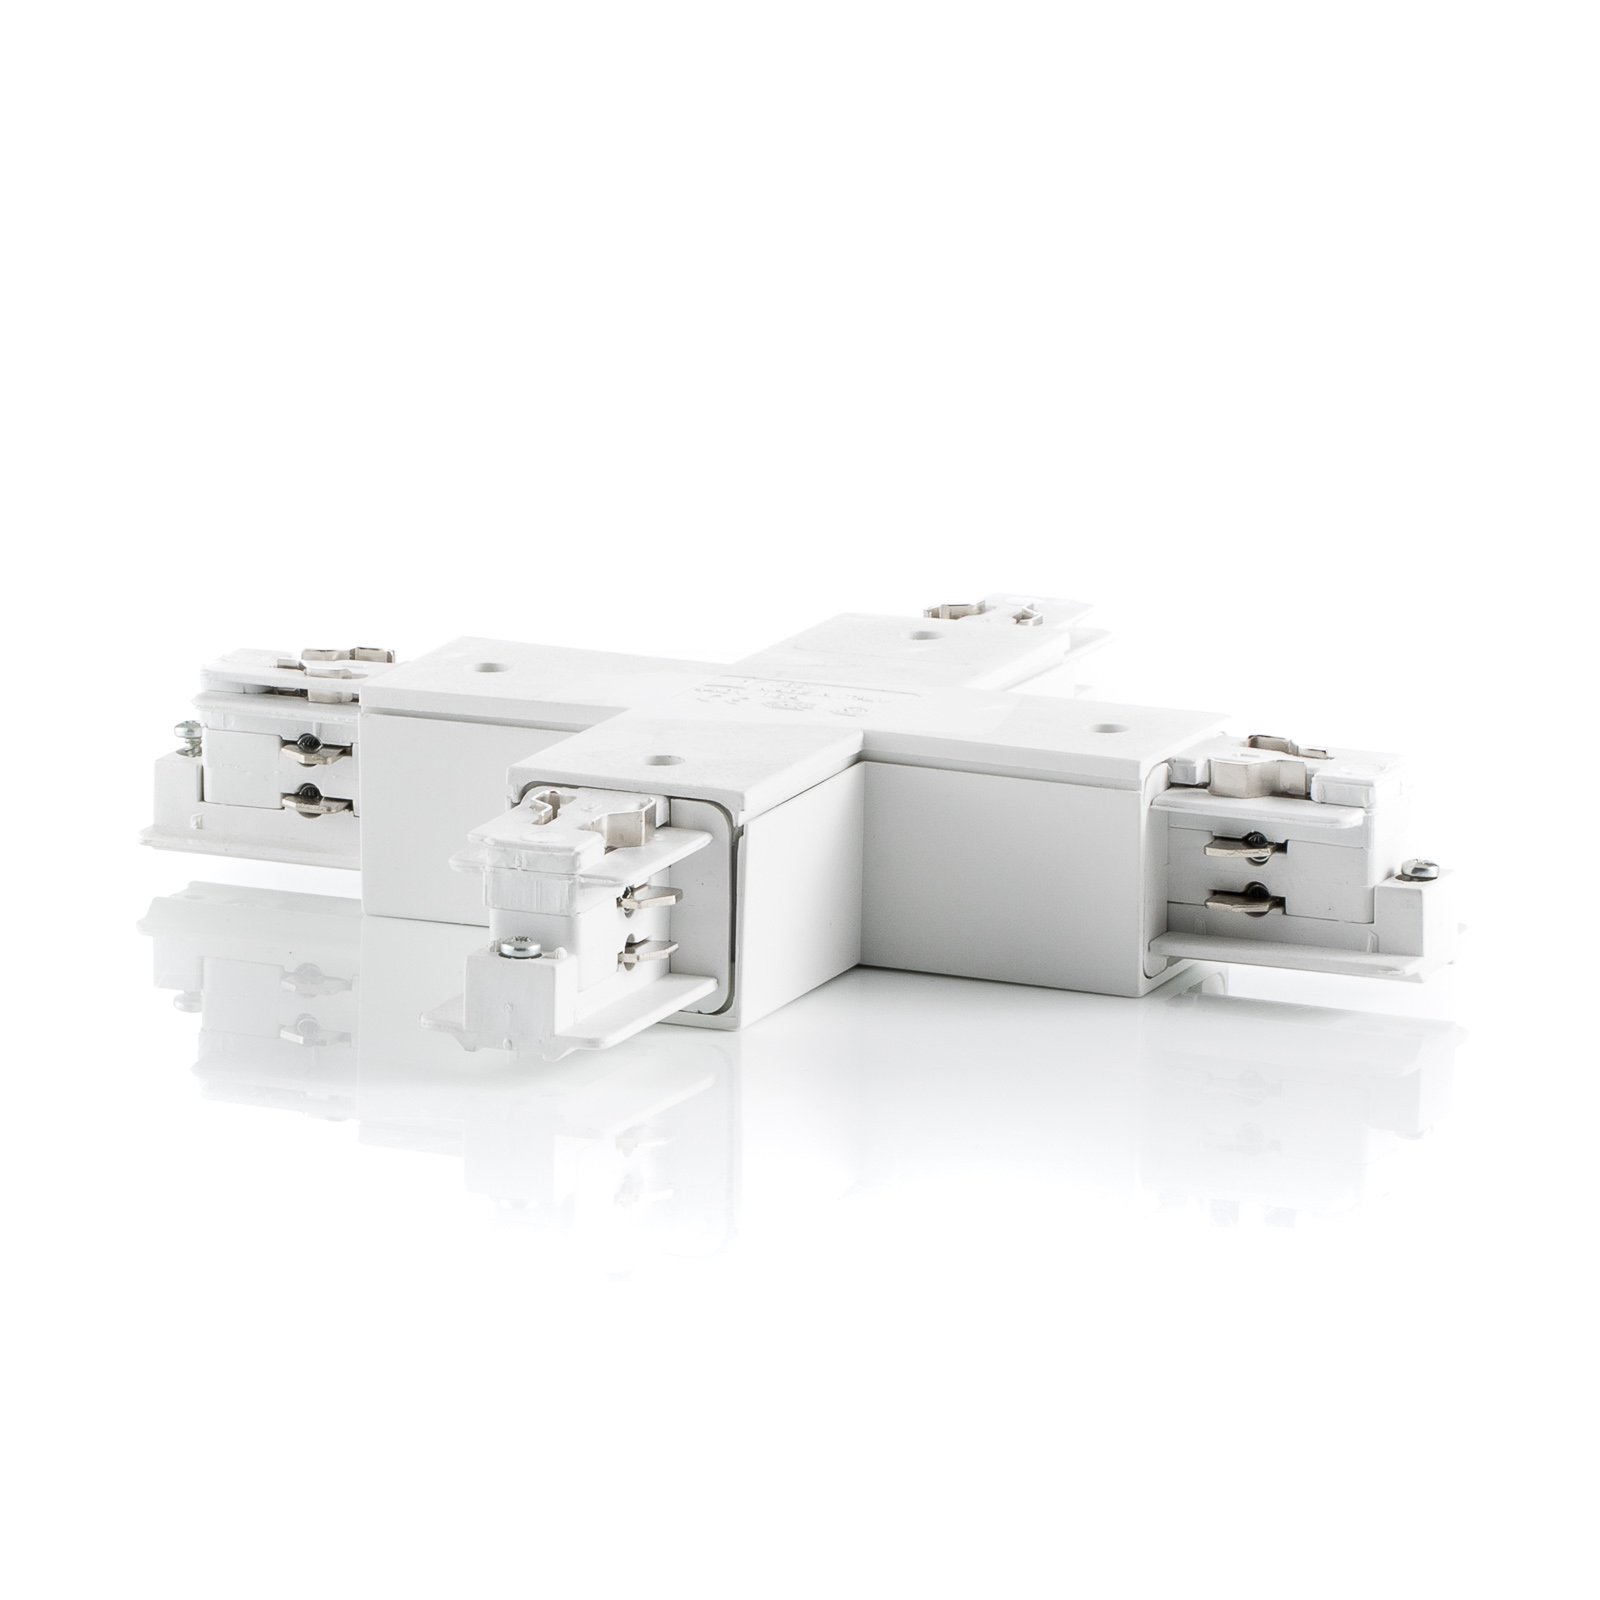 Ivela X connector LKM 3-circuit system, white